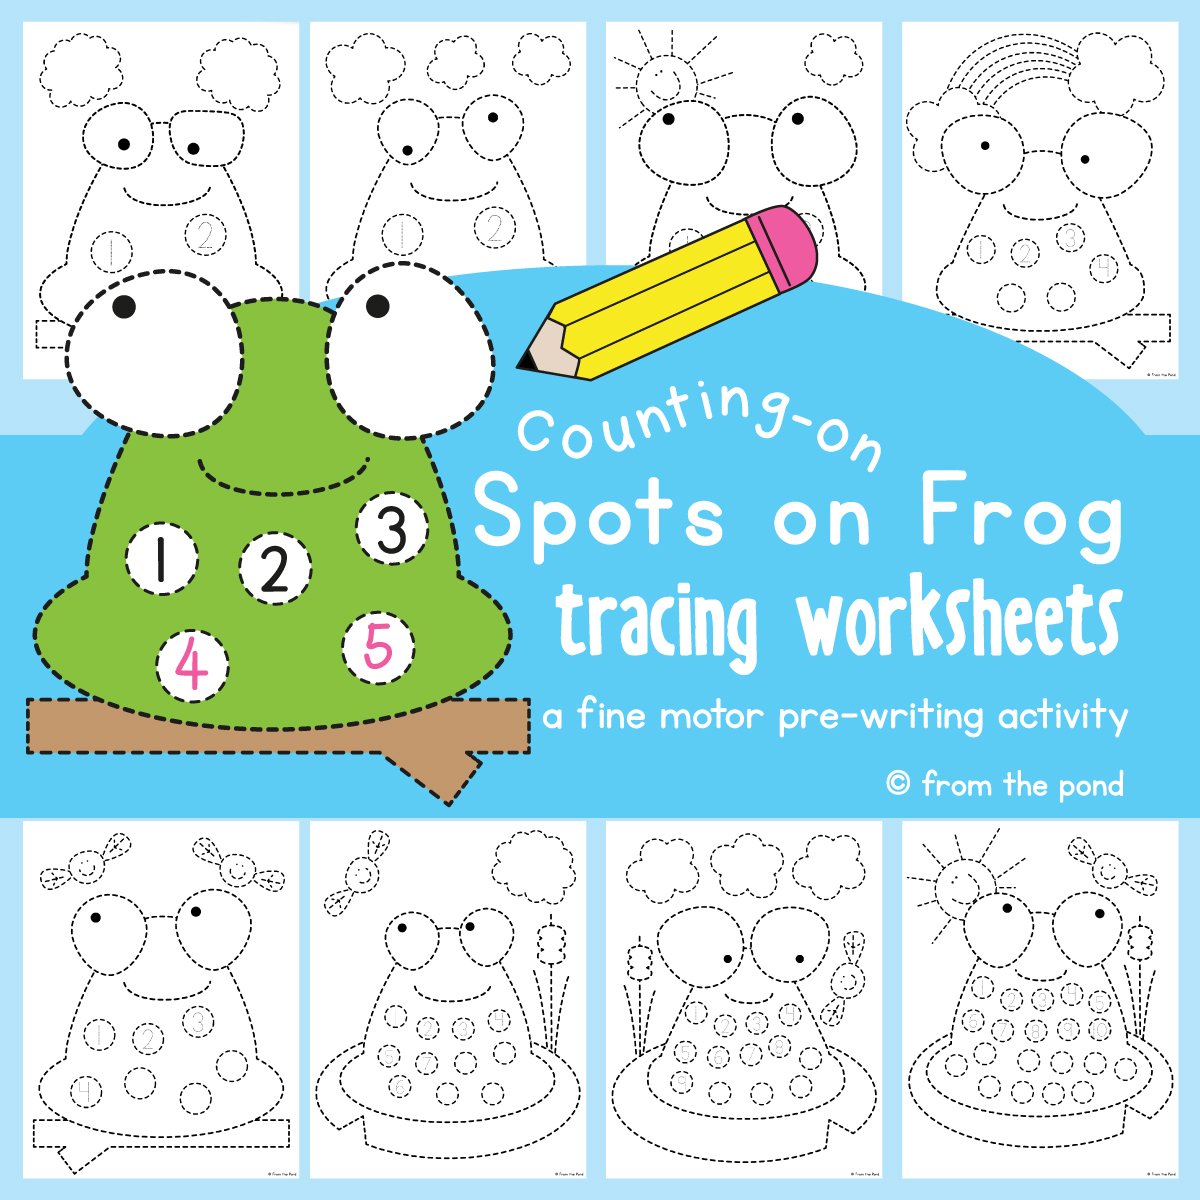 Frog Counting-on